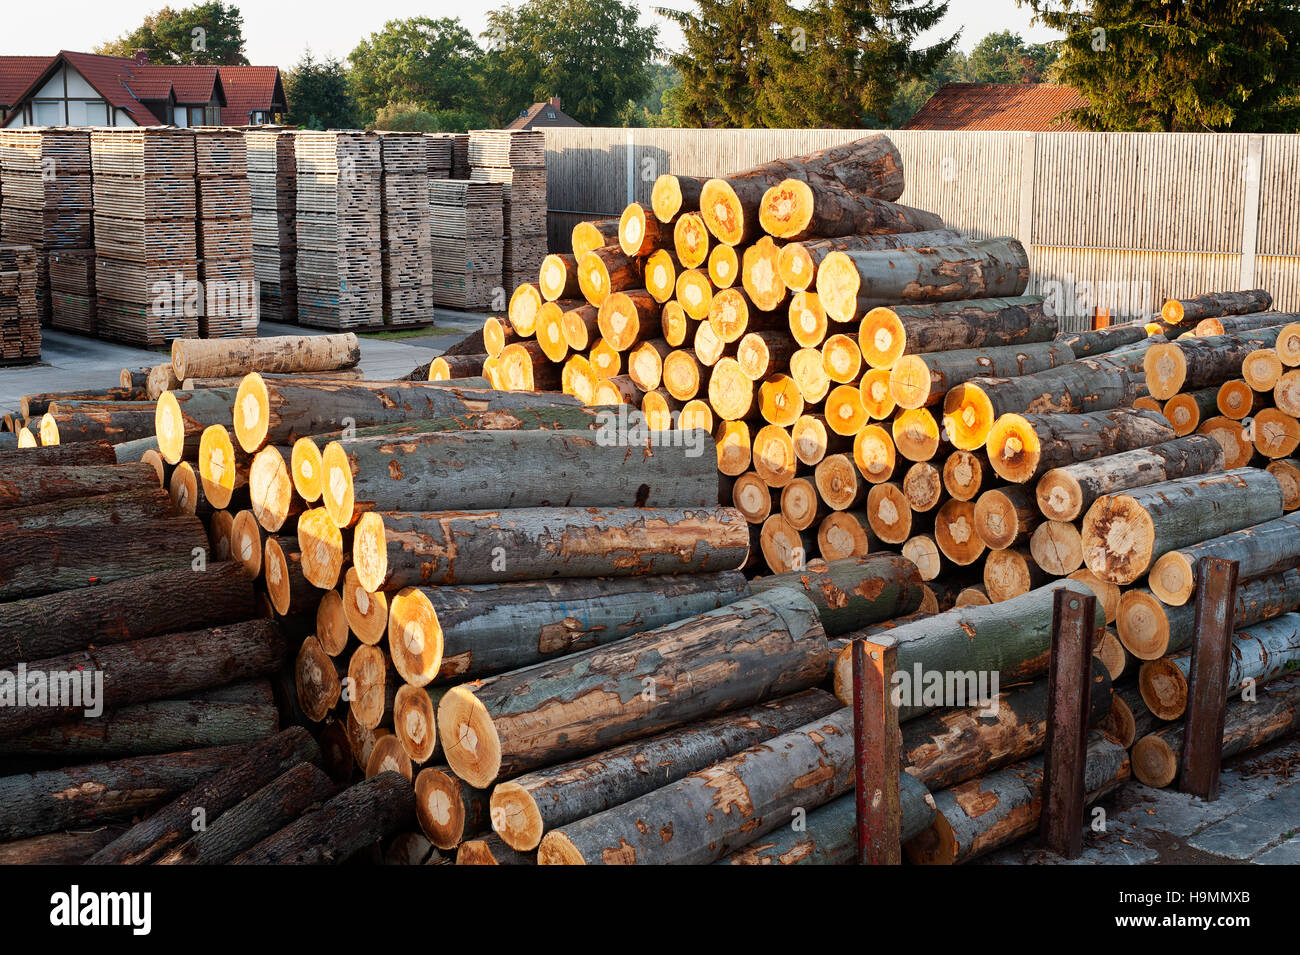 Tree-trunks for processing in timber processing plant, Templin, Uckermark district of Brandenurg, Germany. Stock Photo